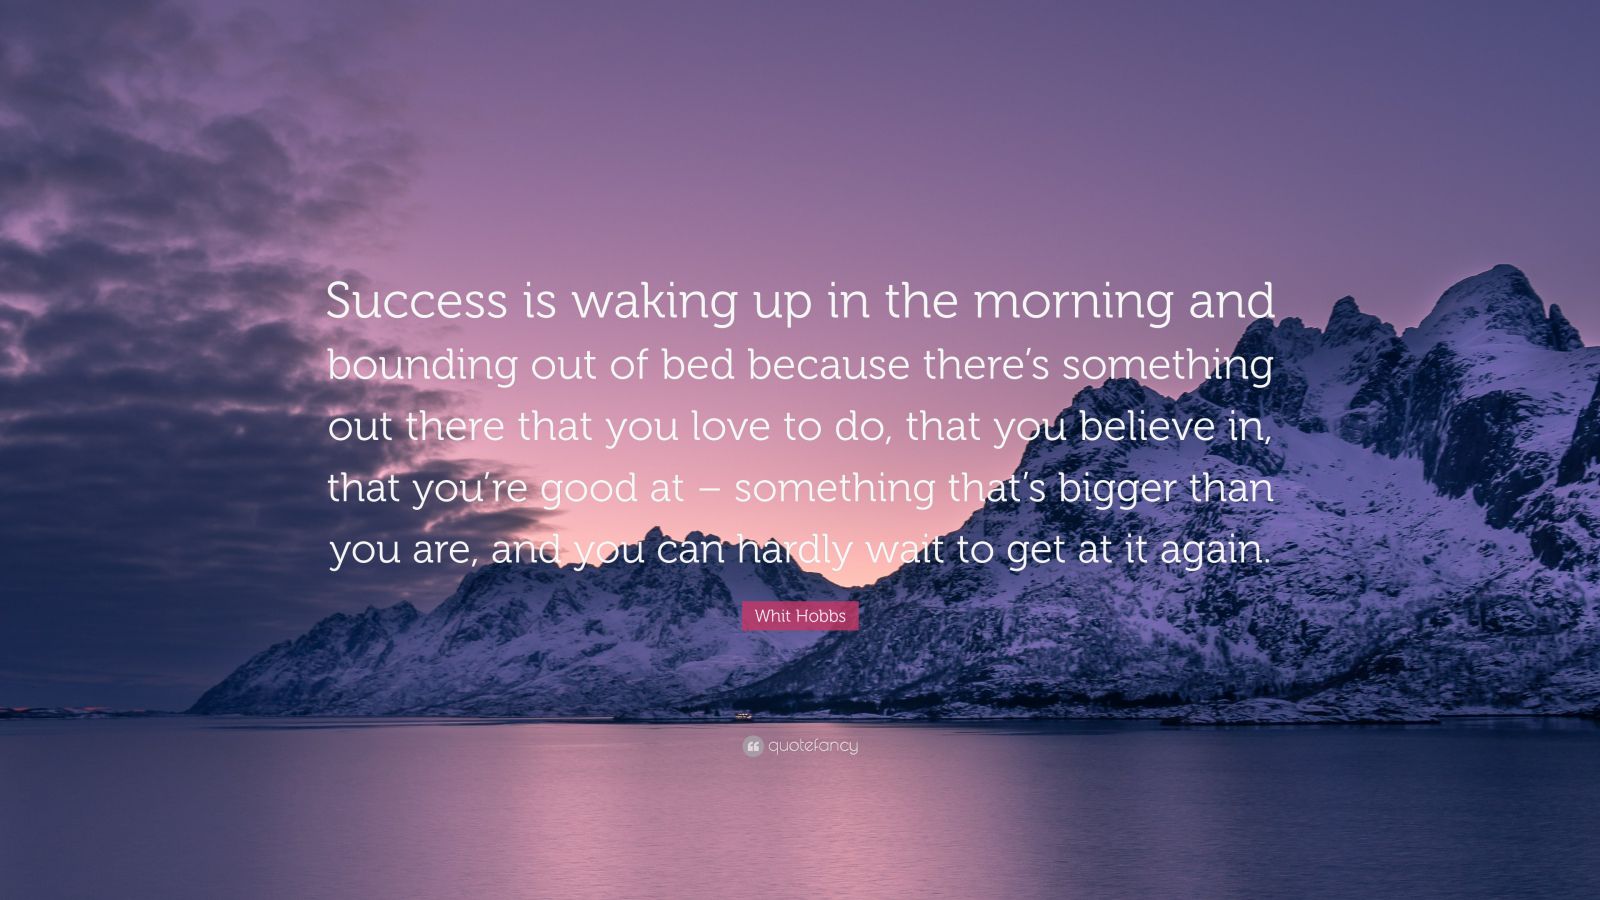 Whit Hobbs Quote: “Success is waking up in the morning and bounding out ...